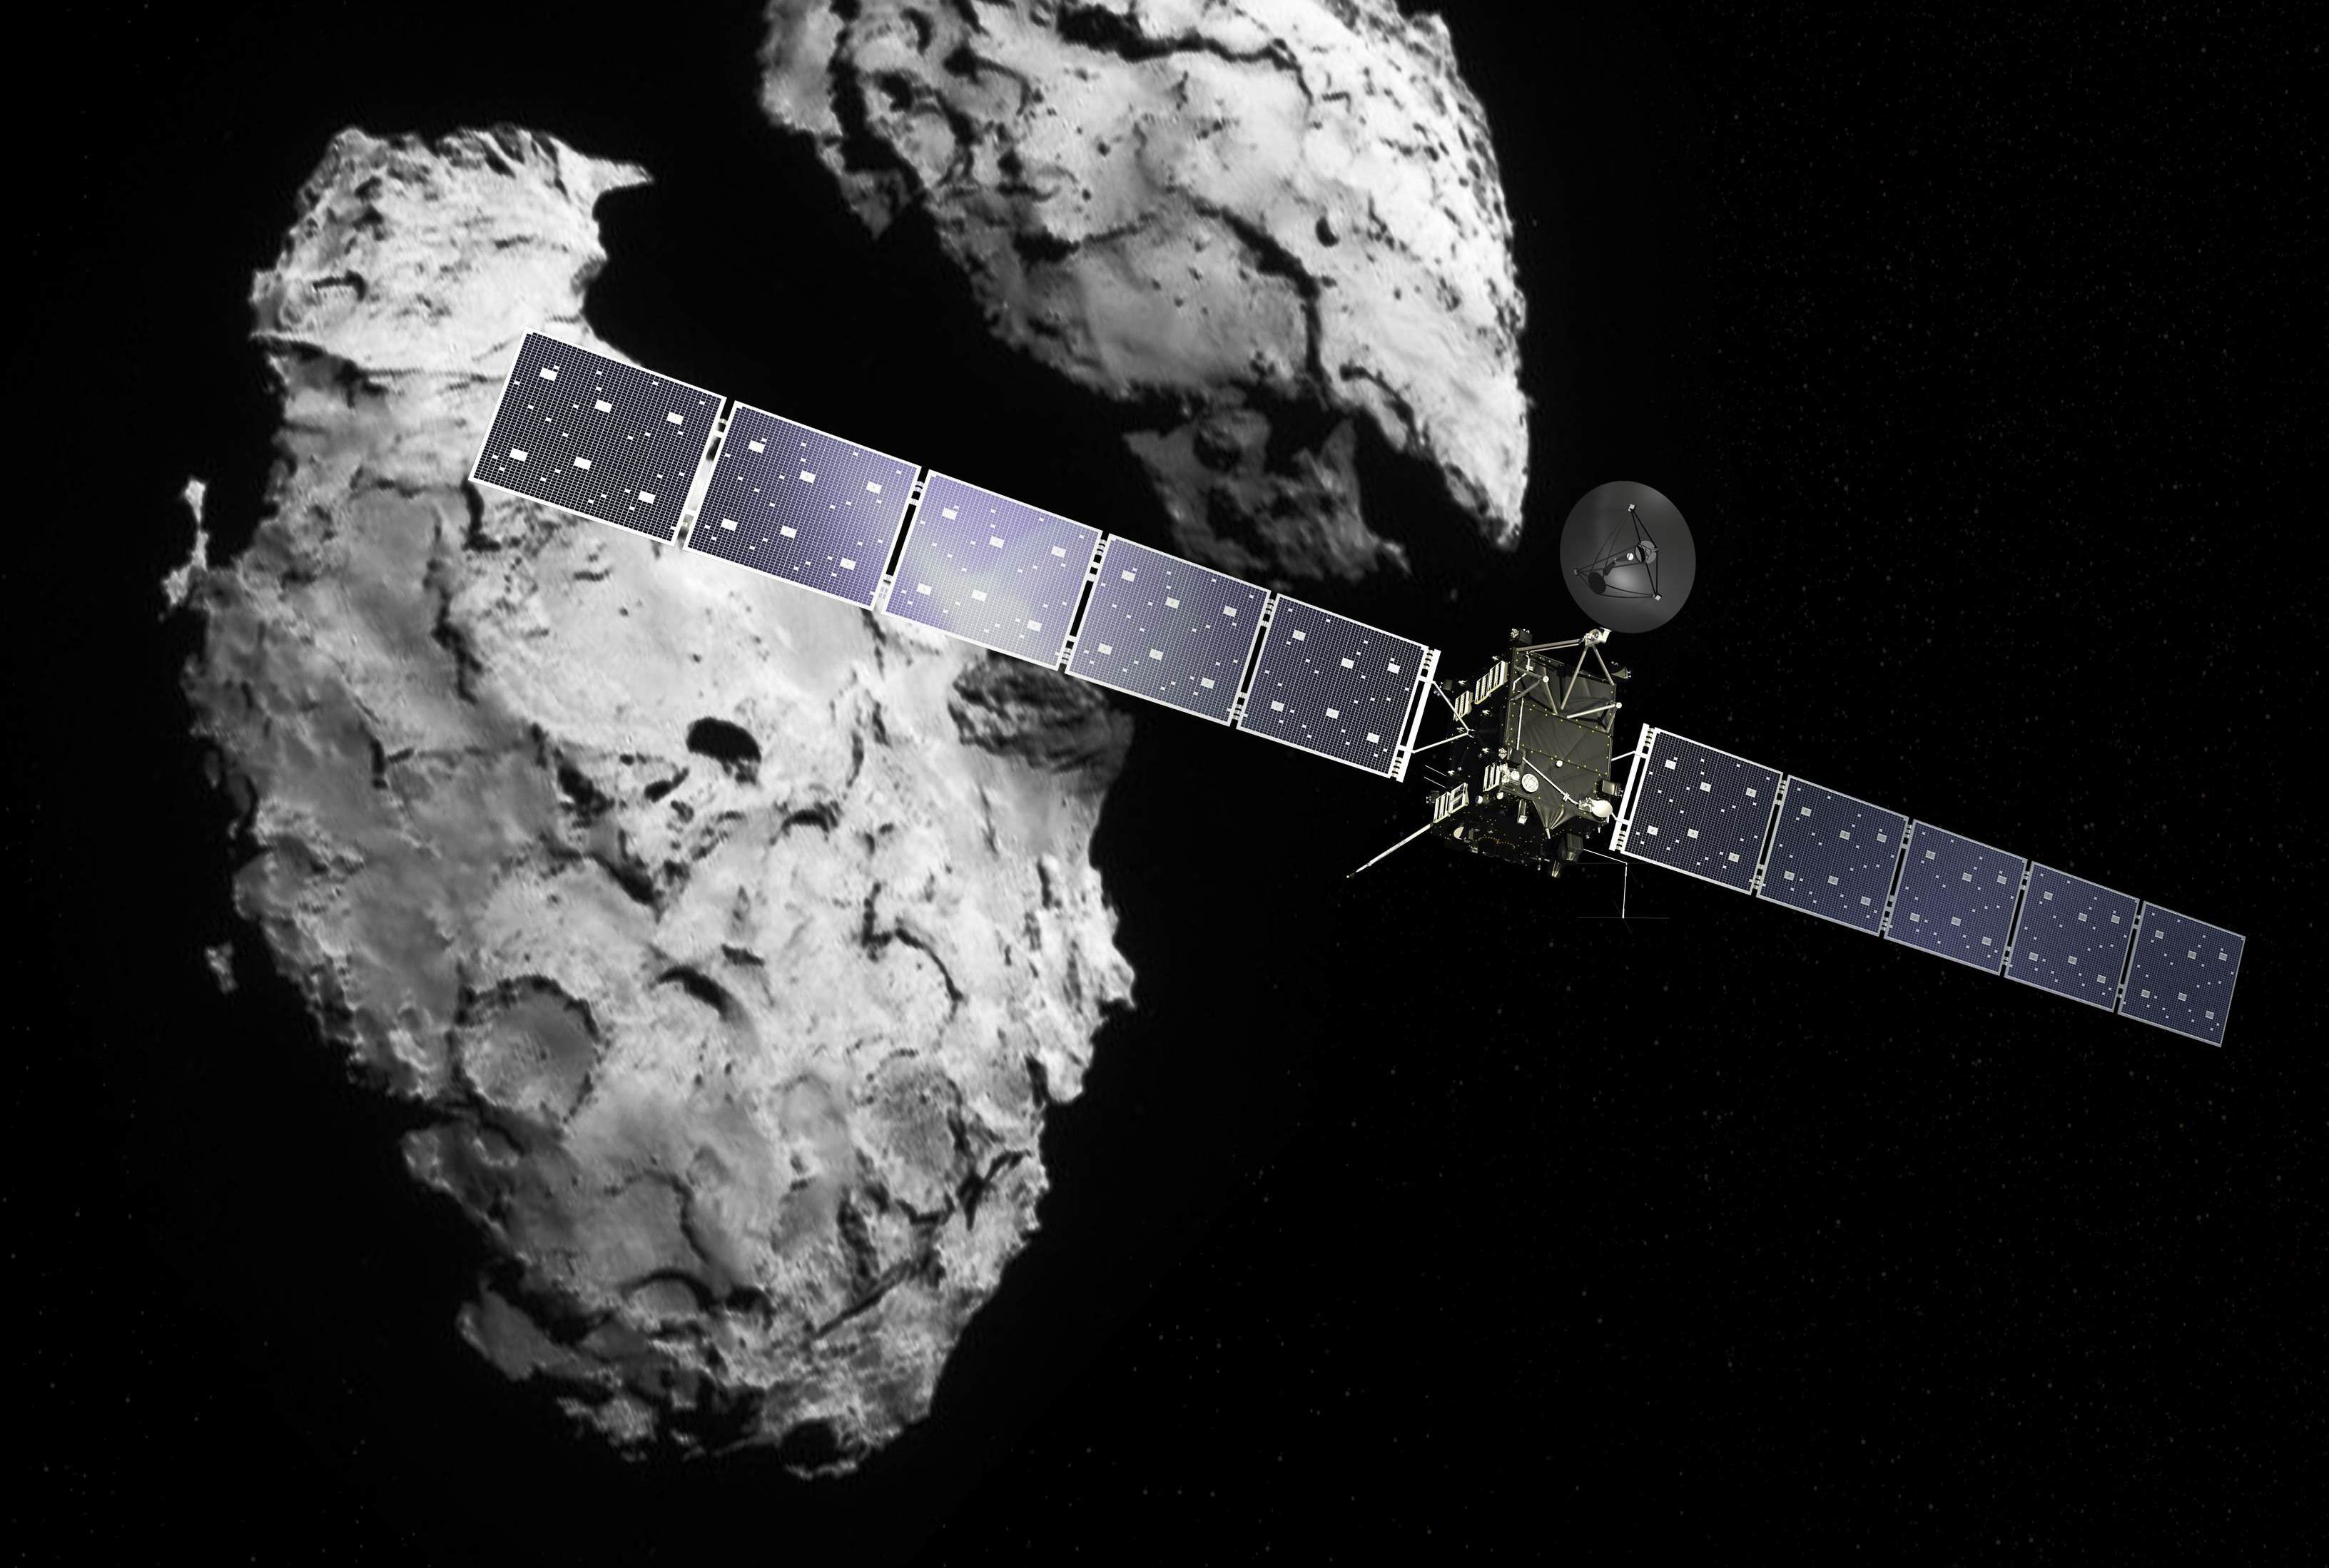 An artist’s depiction of the European Space Agency’s Rosetta spacecraft approaching its target